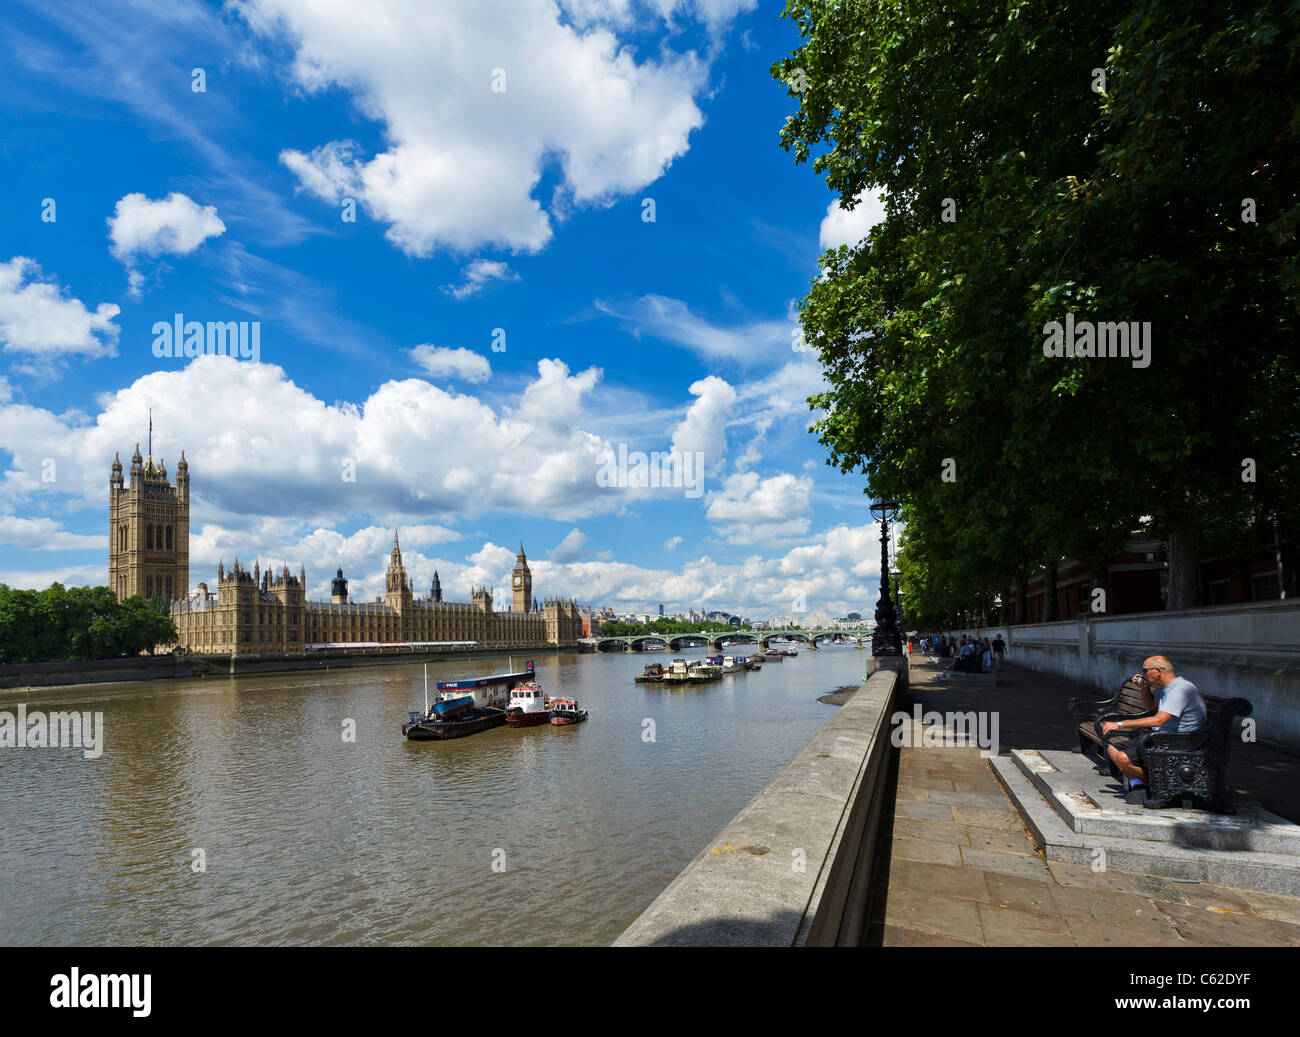 The River Thames and Houses of Parliament viewed from the South Bank with Westminster Bridge in the distance, London, England Stock Photo